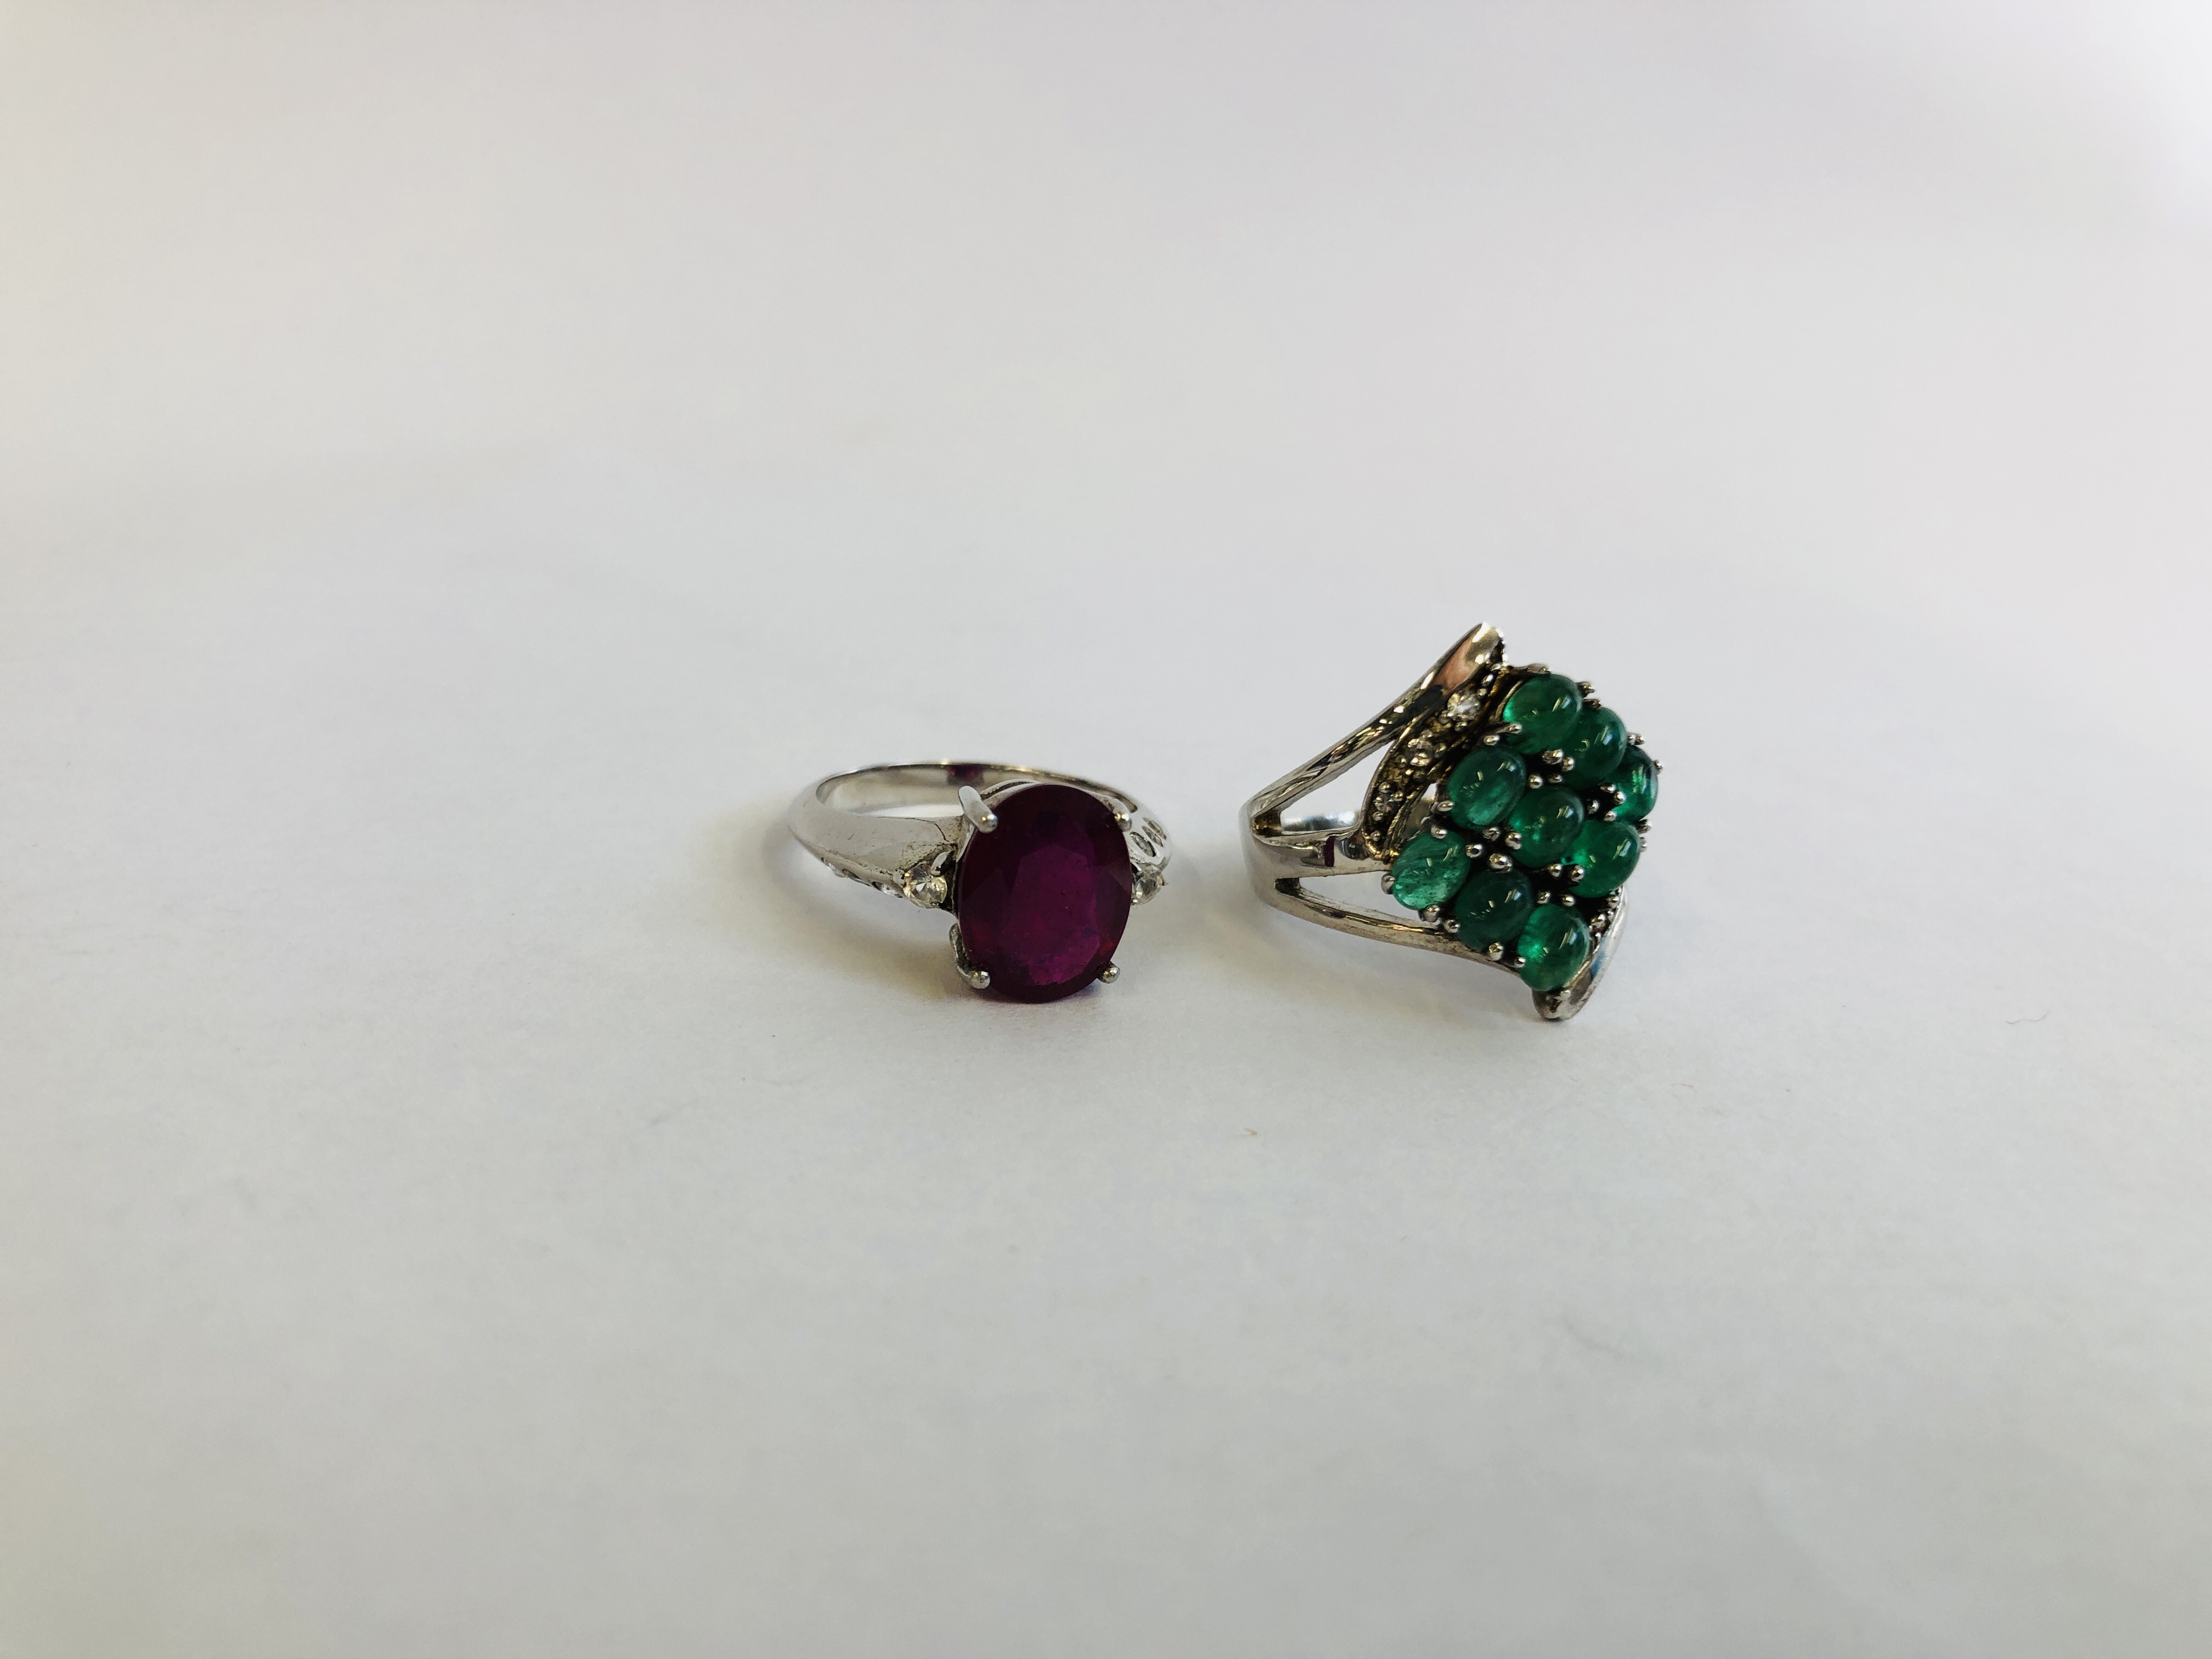 2 X DESIGNER SILVER RINGS, GREEN STONES IN A LOZENGE DESIGN AND CLAW SET DEEP PINK STONE.